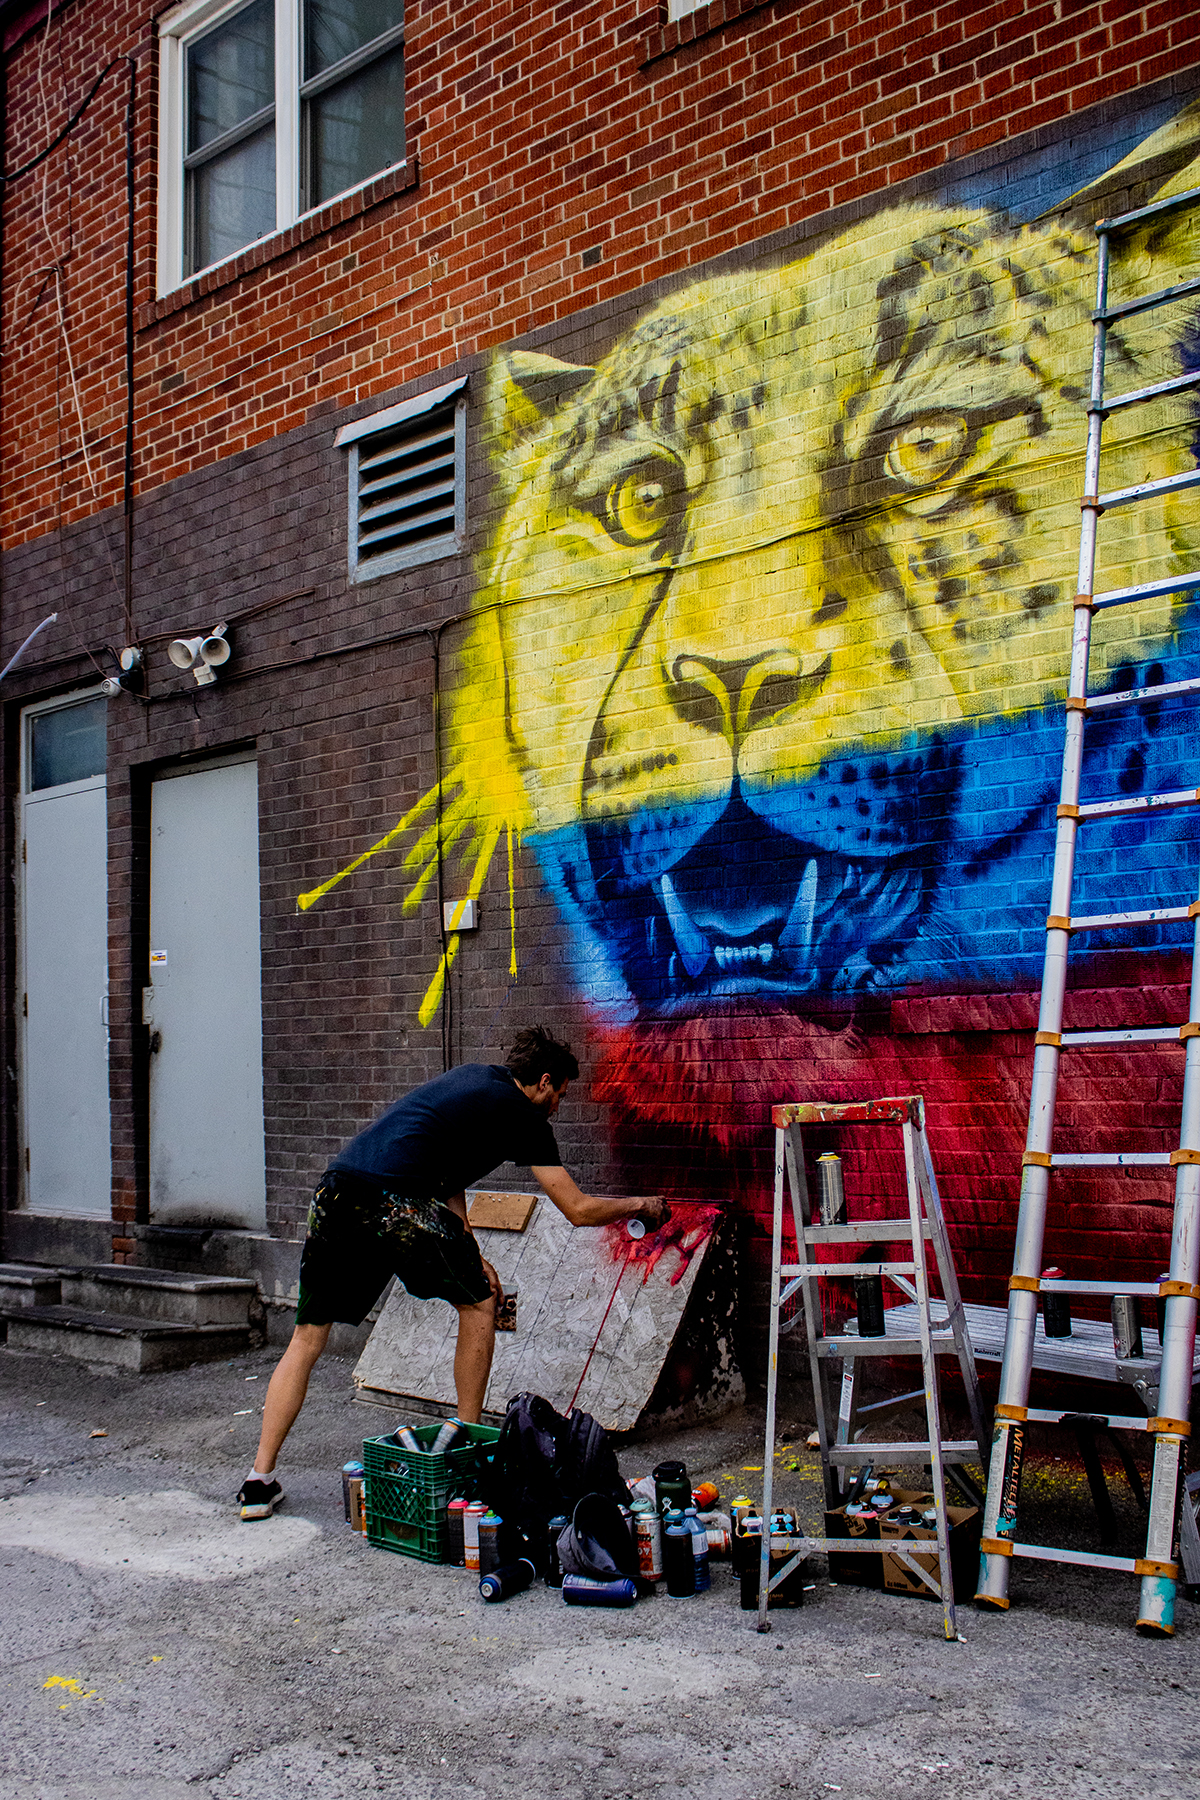 Photo of an artist painting a mural of a leopard in yellow, blue and red - there is a ladder, window and box of spray paints in the image